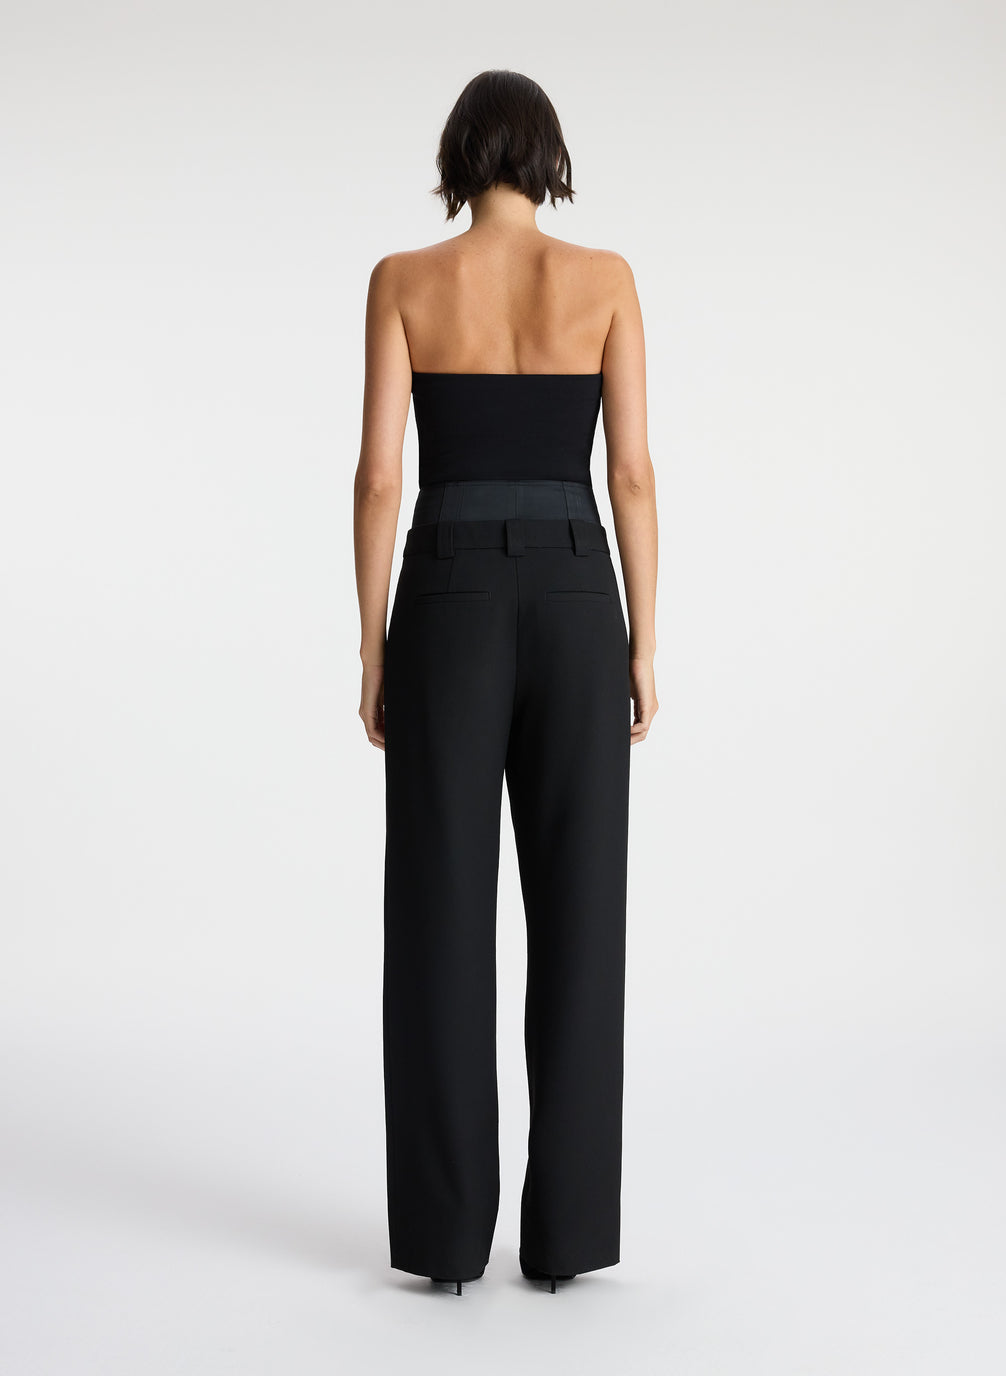 back view of woman wearing black strapless compact knit top and black satin pants